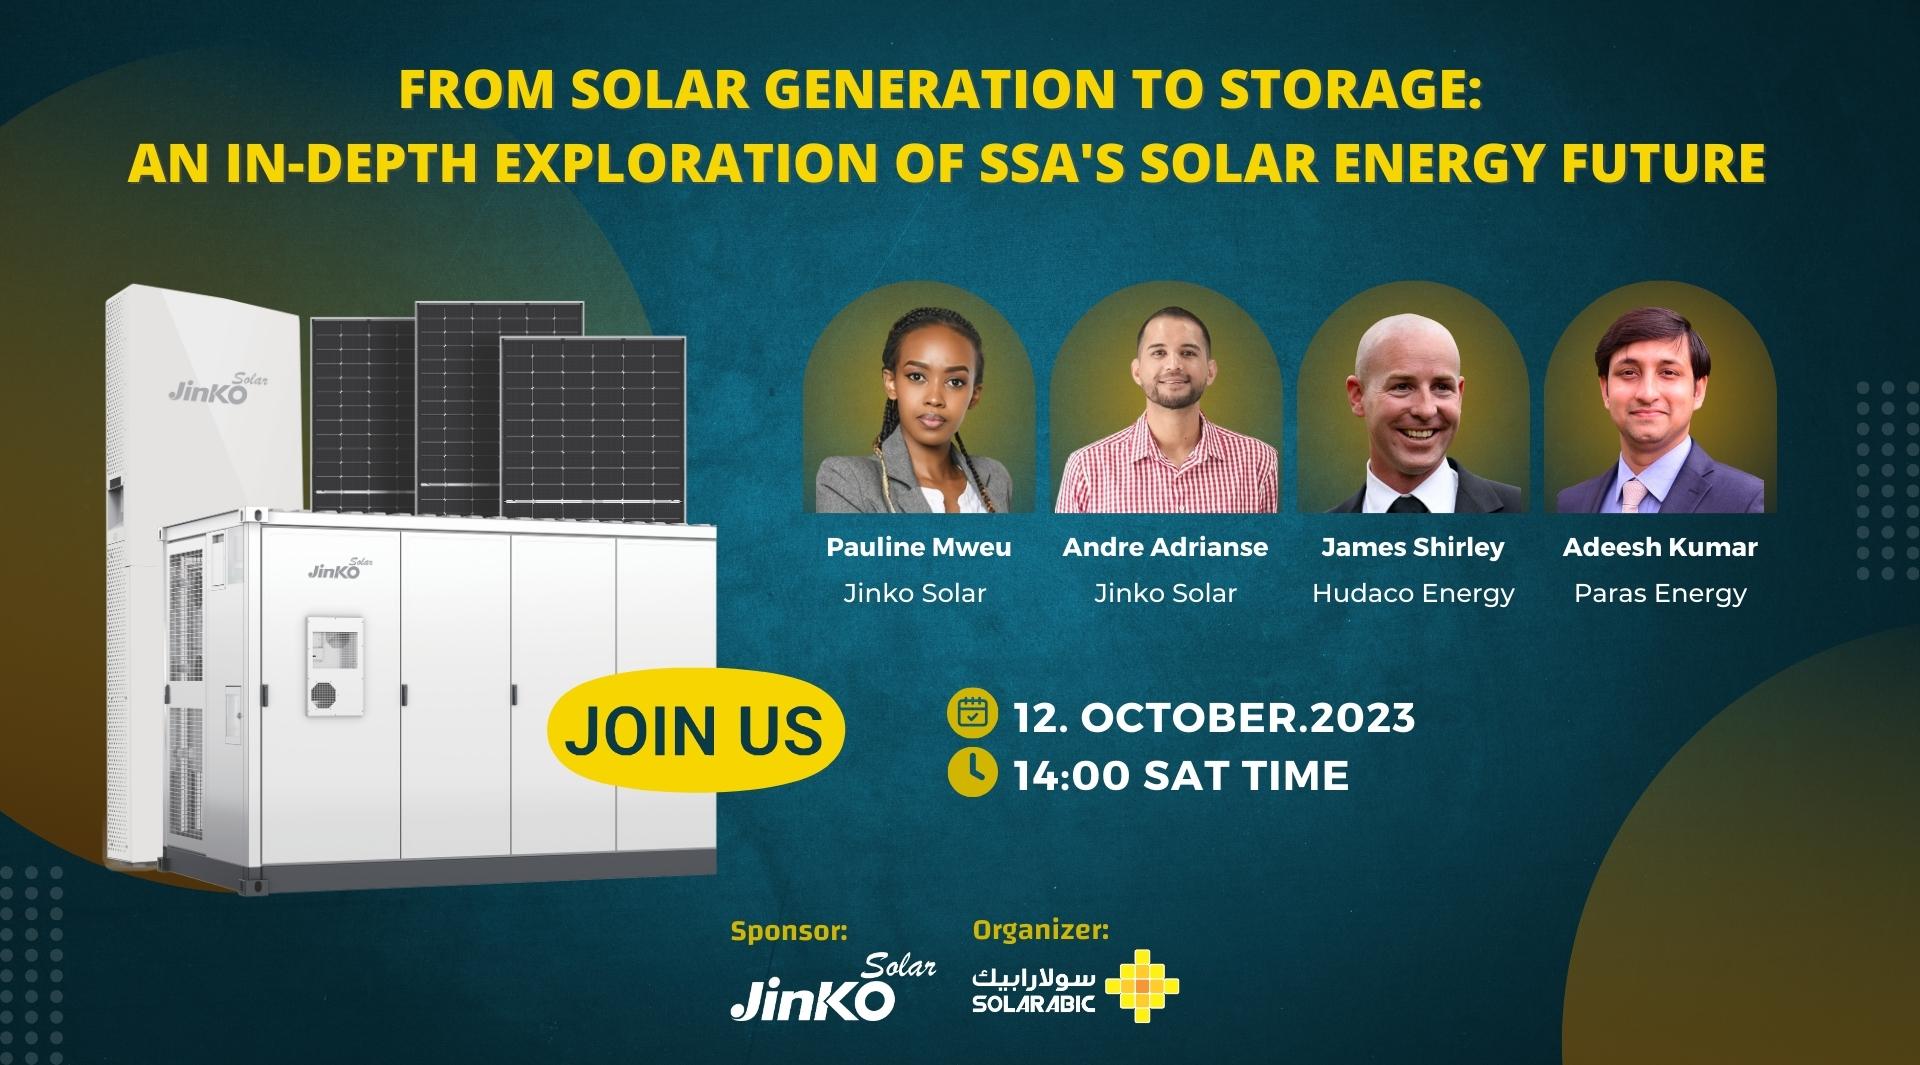 From Solar Generation to Storage An In-Depth Exploration of SSA's Solar Energy Future